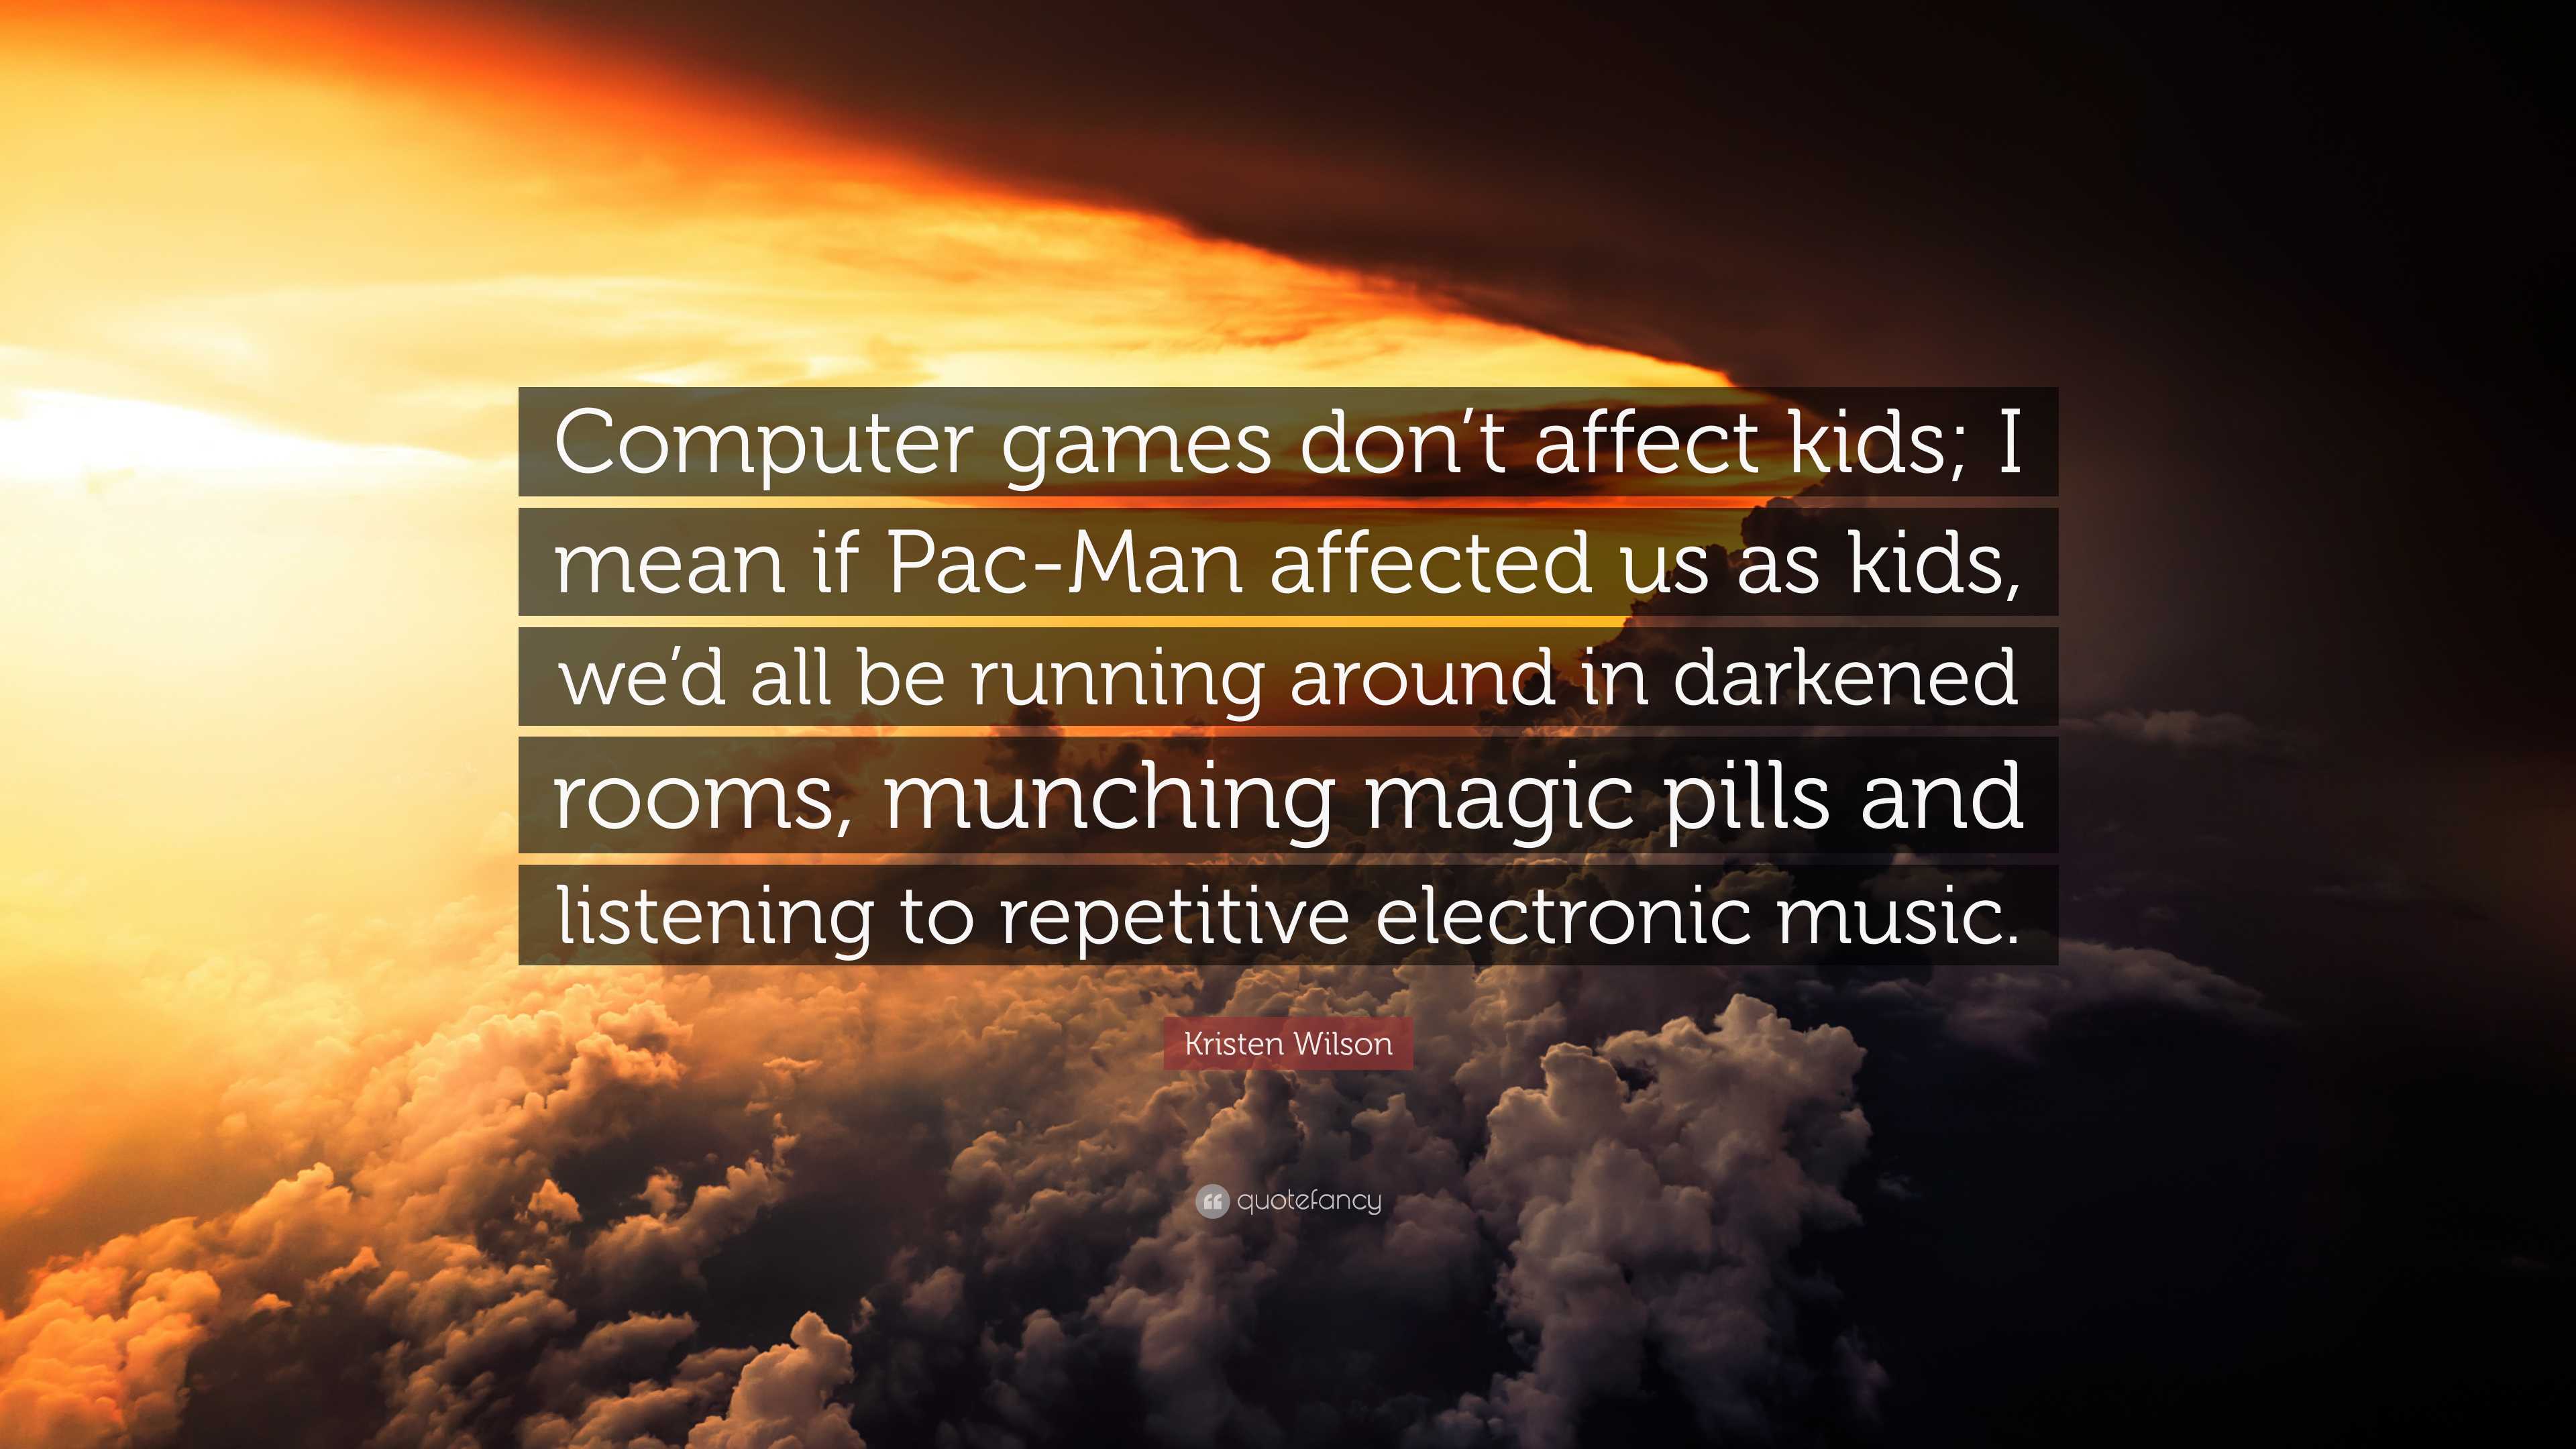 Kristen Wilson Quote: “Computer games don't affect kids; I mean if